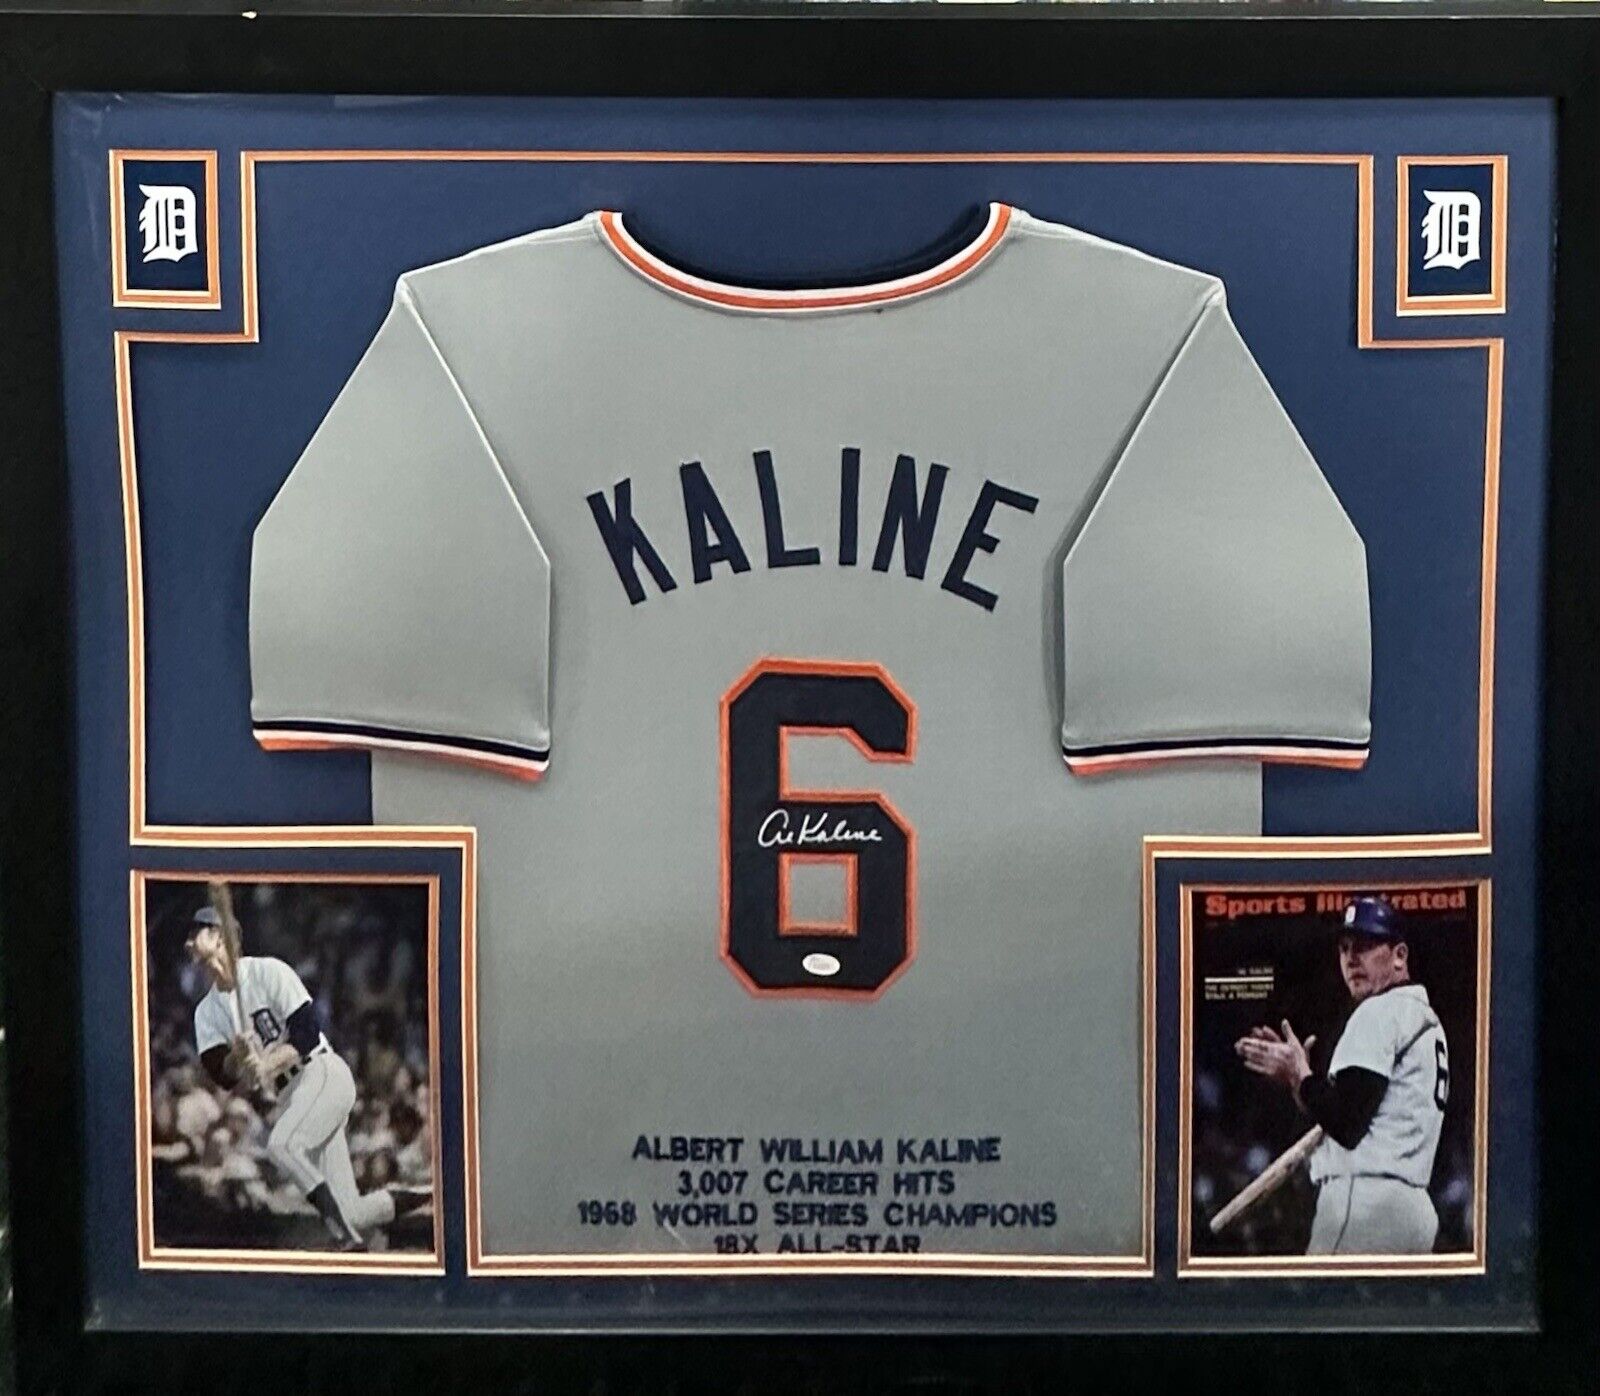 Al Kaline HOF 80 Autographed Detroit Tigers Majestic Cool Base Baseball  Jersey - PSA/DNA COA at 's Sports Collectibles Store